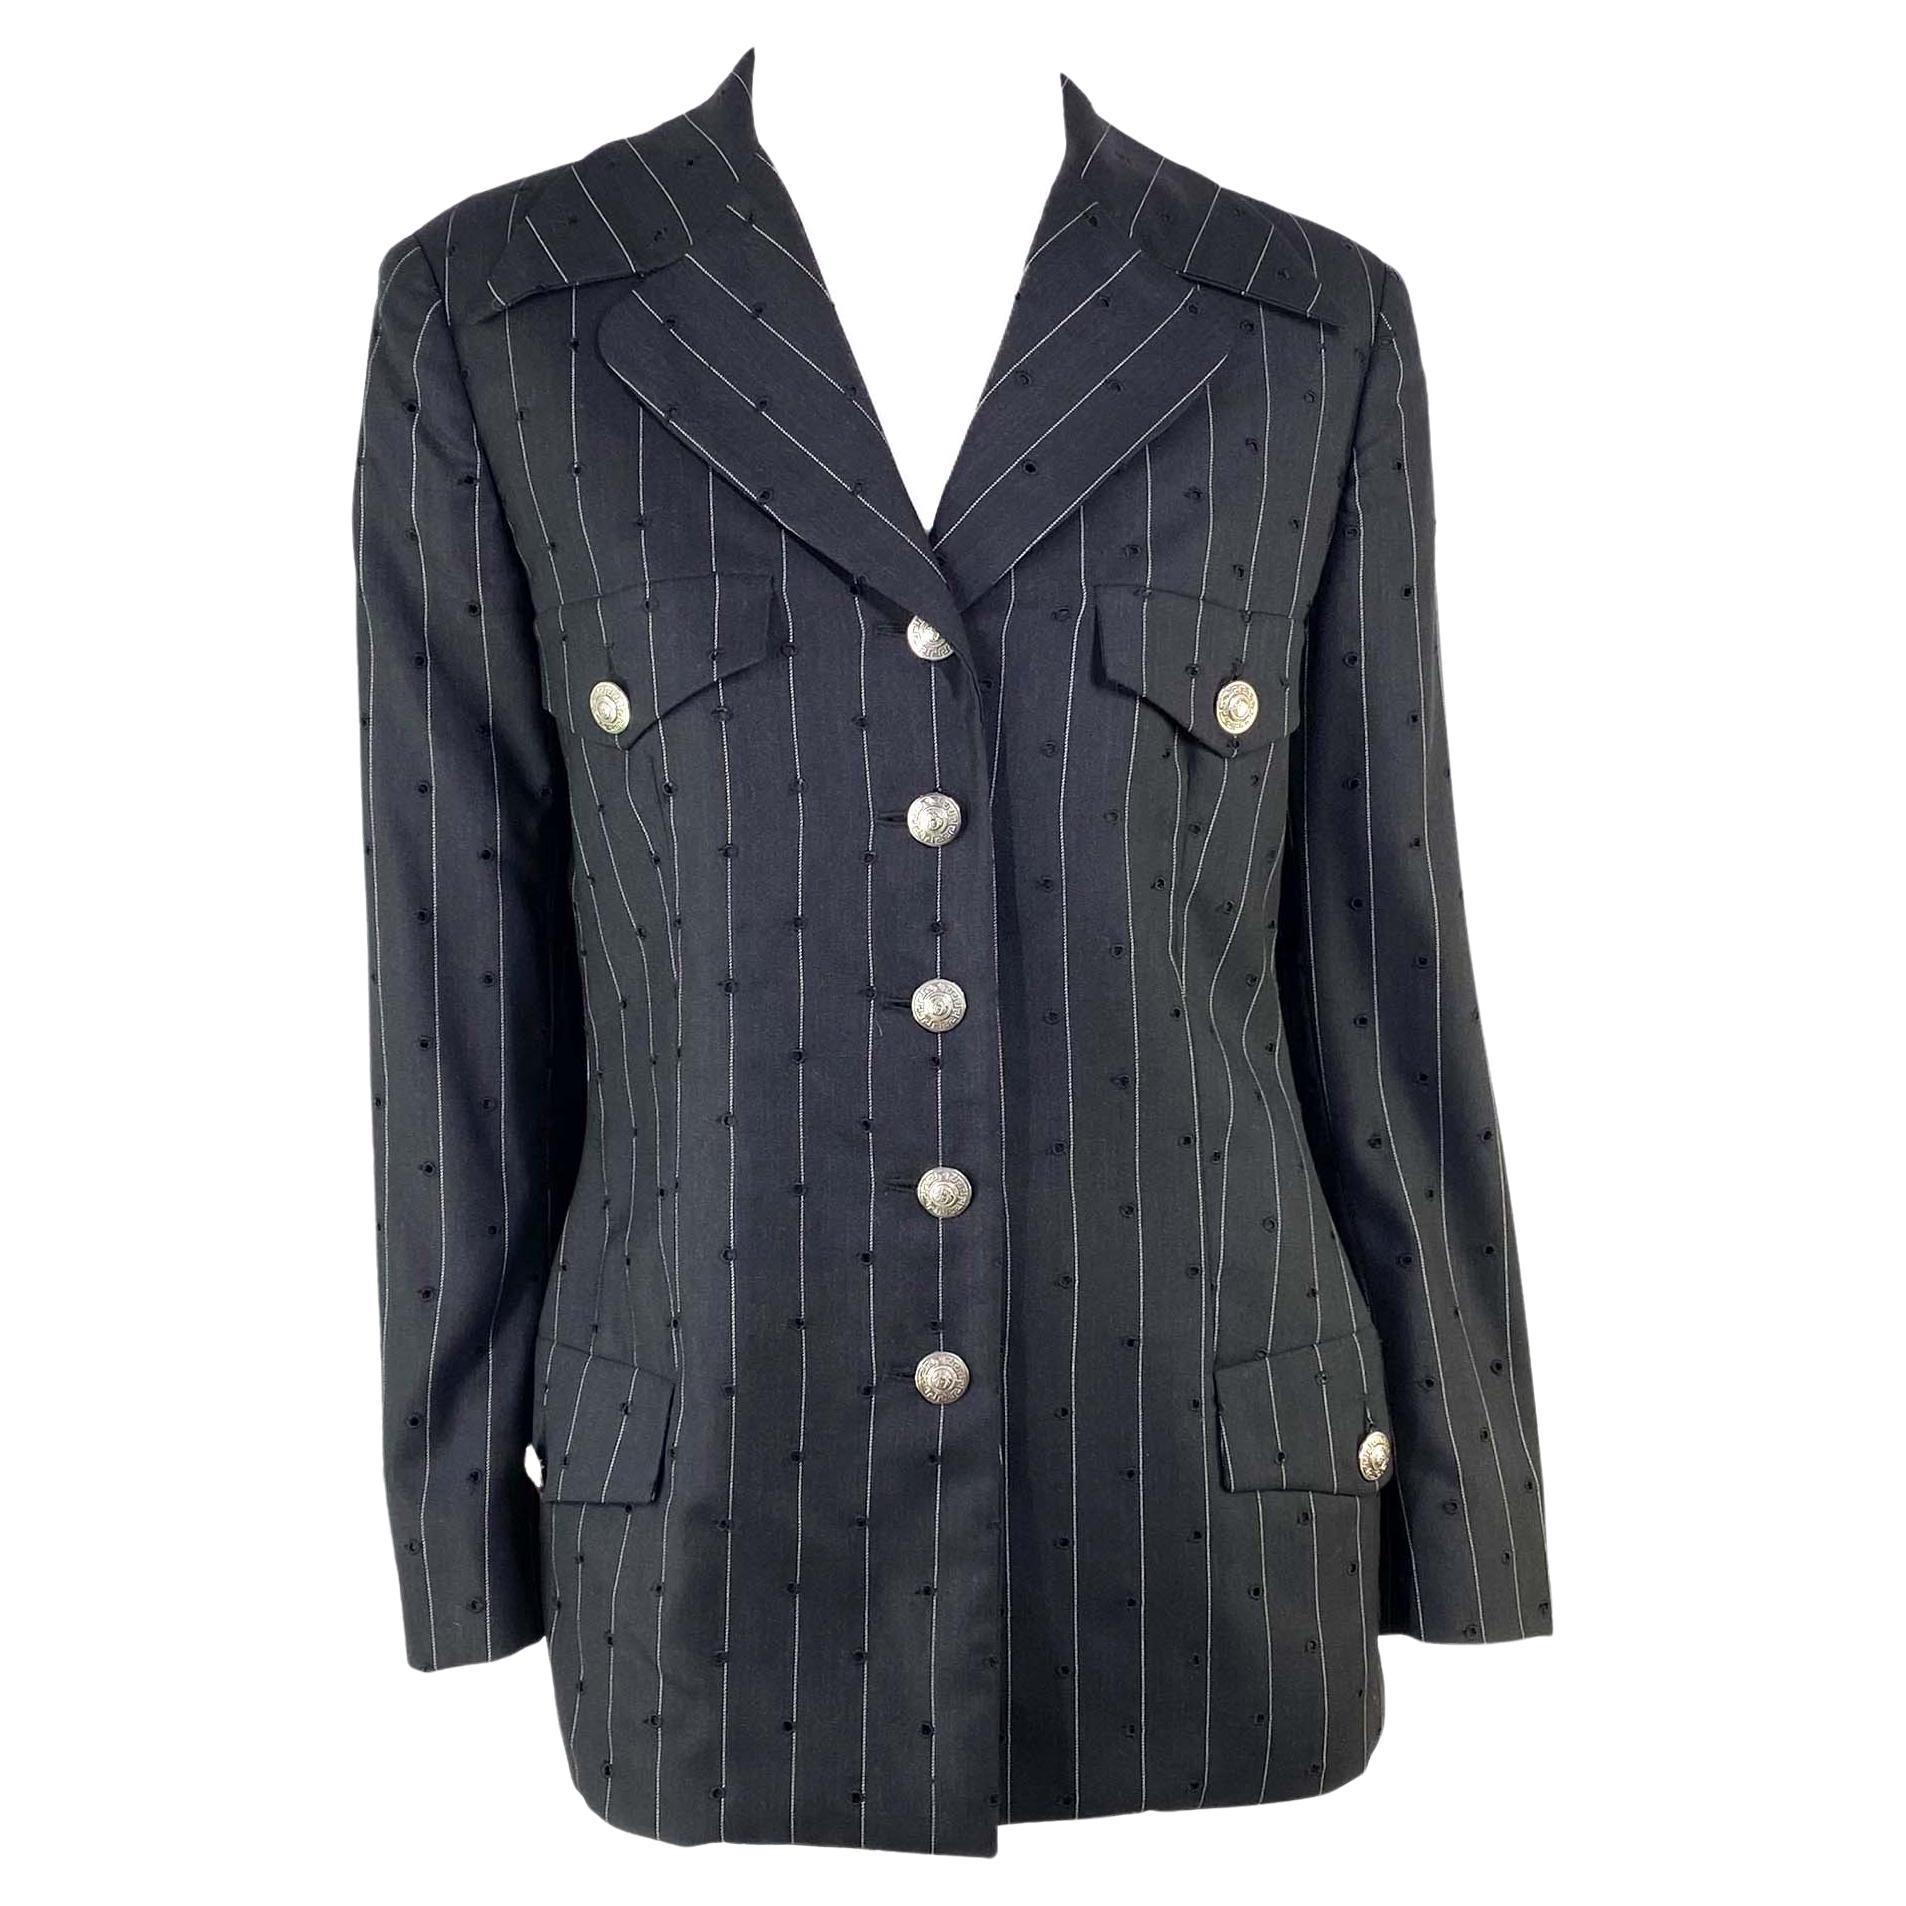 S/S 1994 Gianni Versace Couture Perforated Punk Pinstripe Medusa Wool Blazer For Sale